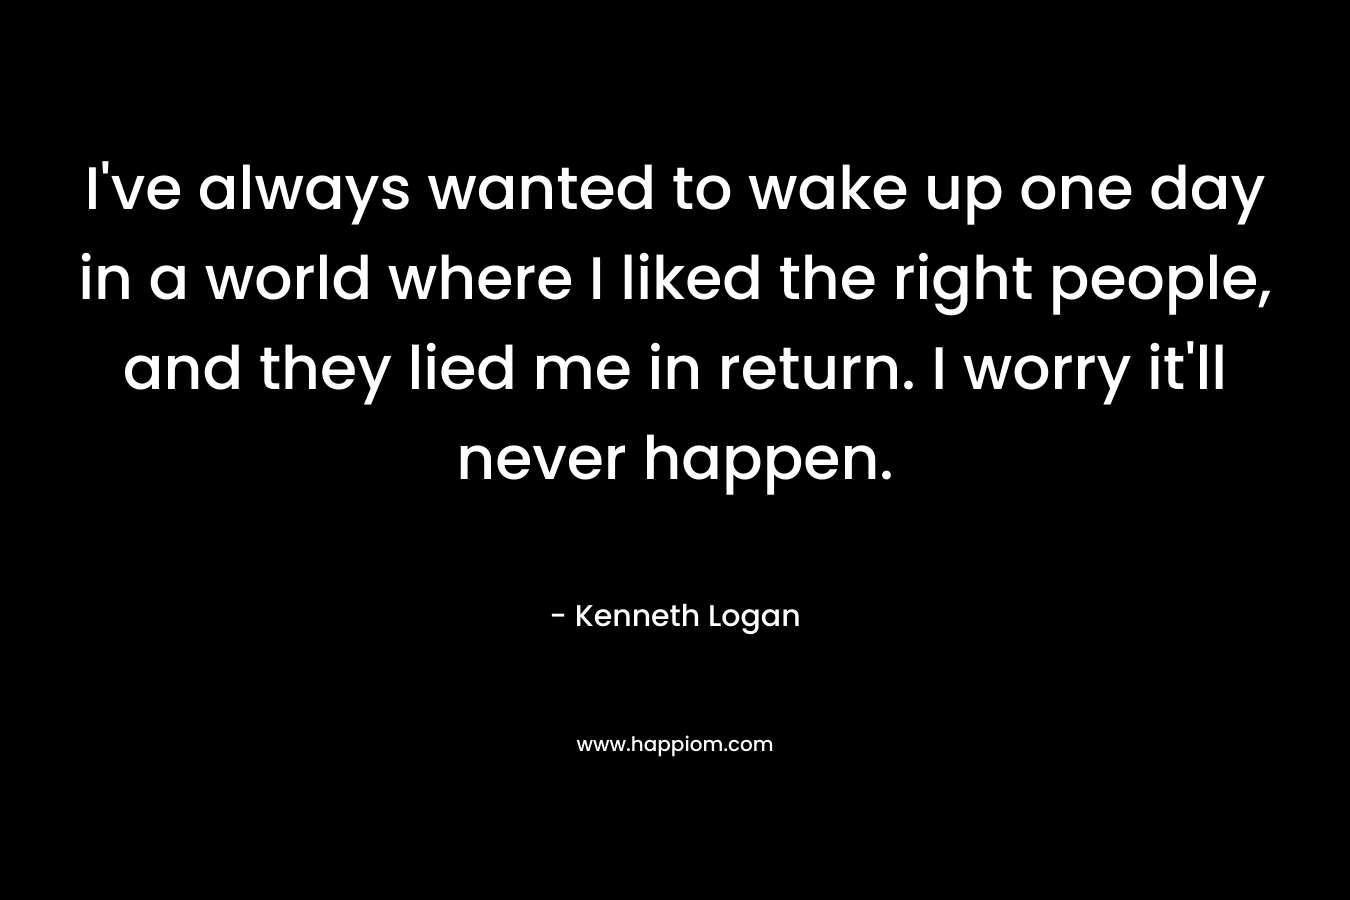 I’ve always wanted to wake up one day in a world where I liked the right people, and they lied me in return. I worry it’ll never happen. – Kenneth Logan